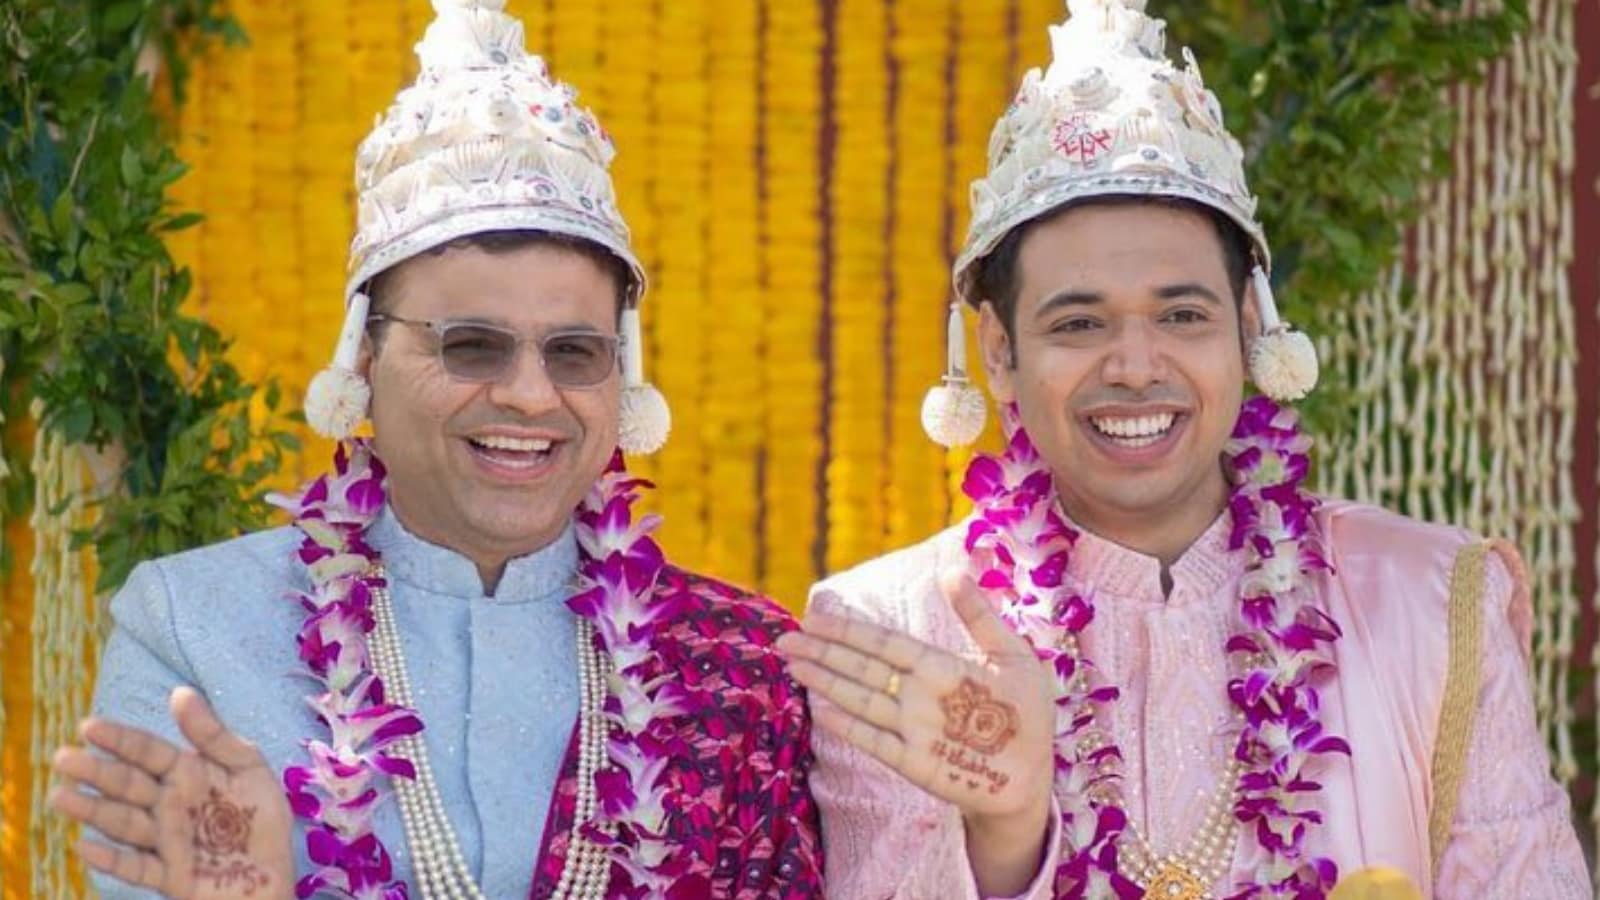 ‘We Hope to Live in a World with No Closets’: Scenes From a Gay Marriage in India